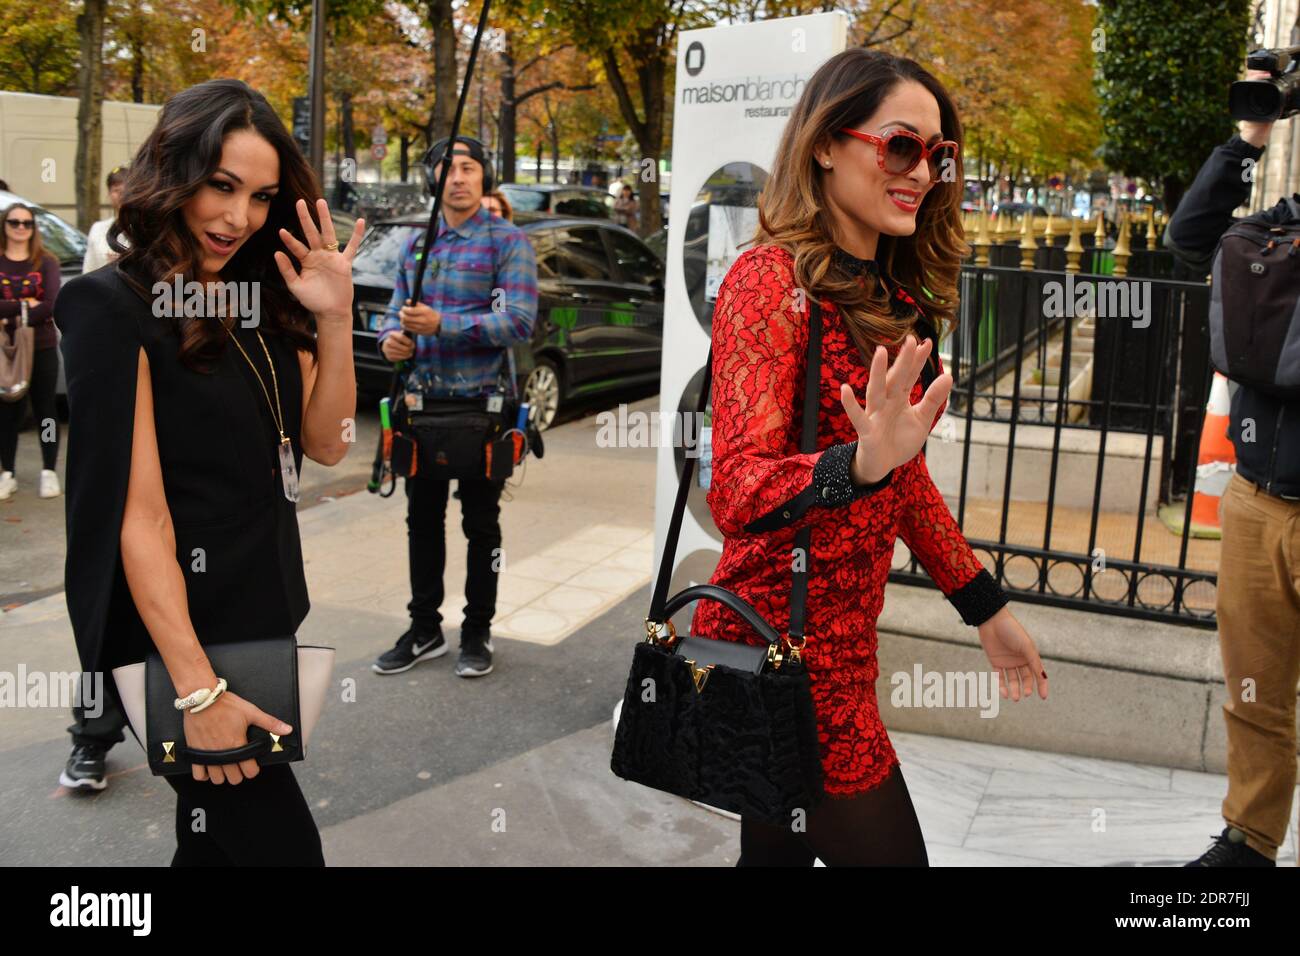 WWE Divas Brie Bella and Nikki Bella attend a photocall to promote their  show 'Total Divas' on October 8, 2015 in Paris, France. Photo by Laurent  Zabulon/ABACAPRESS.COM Stock Photo - Alamy